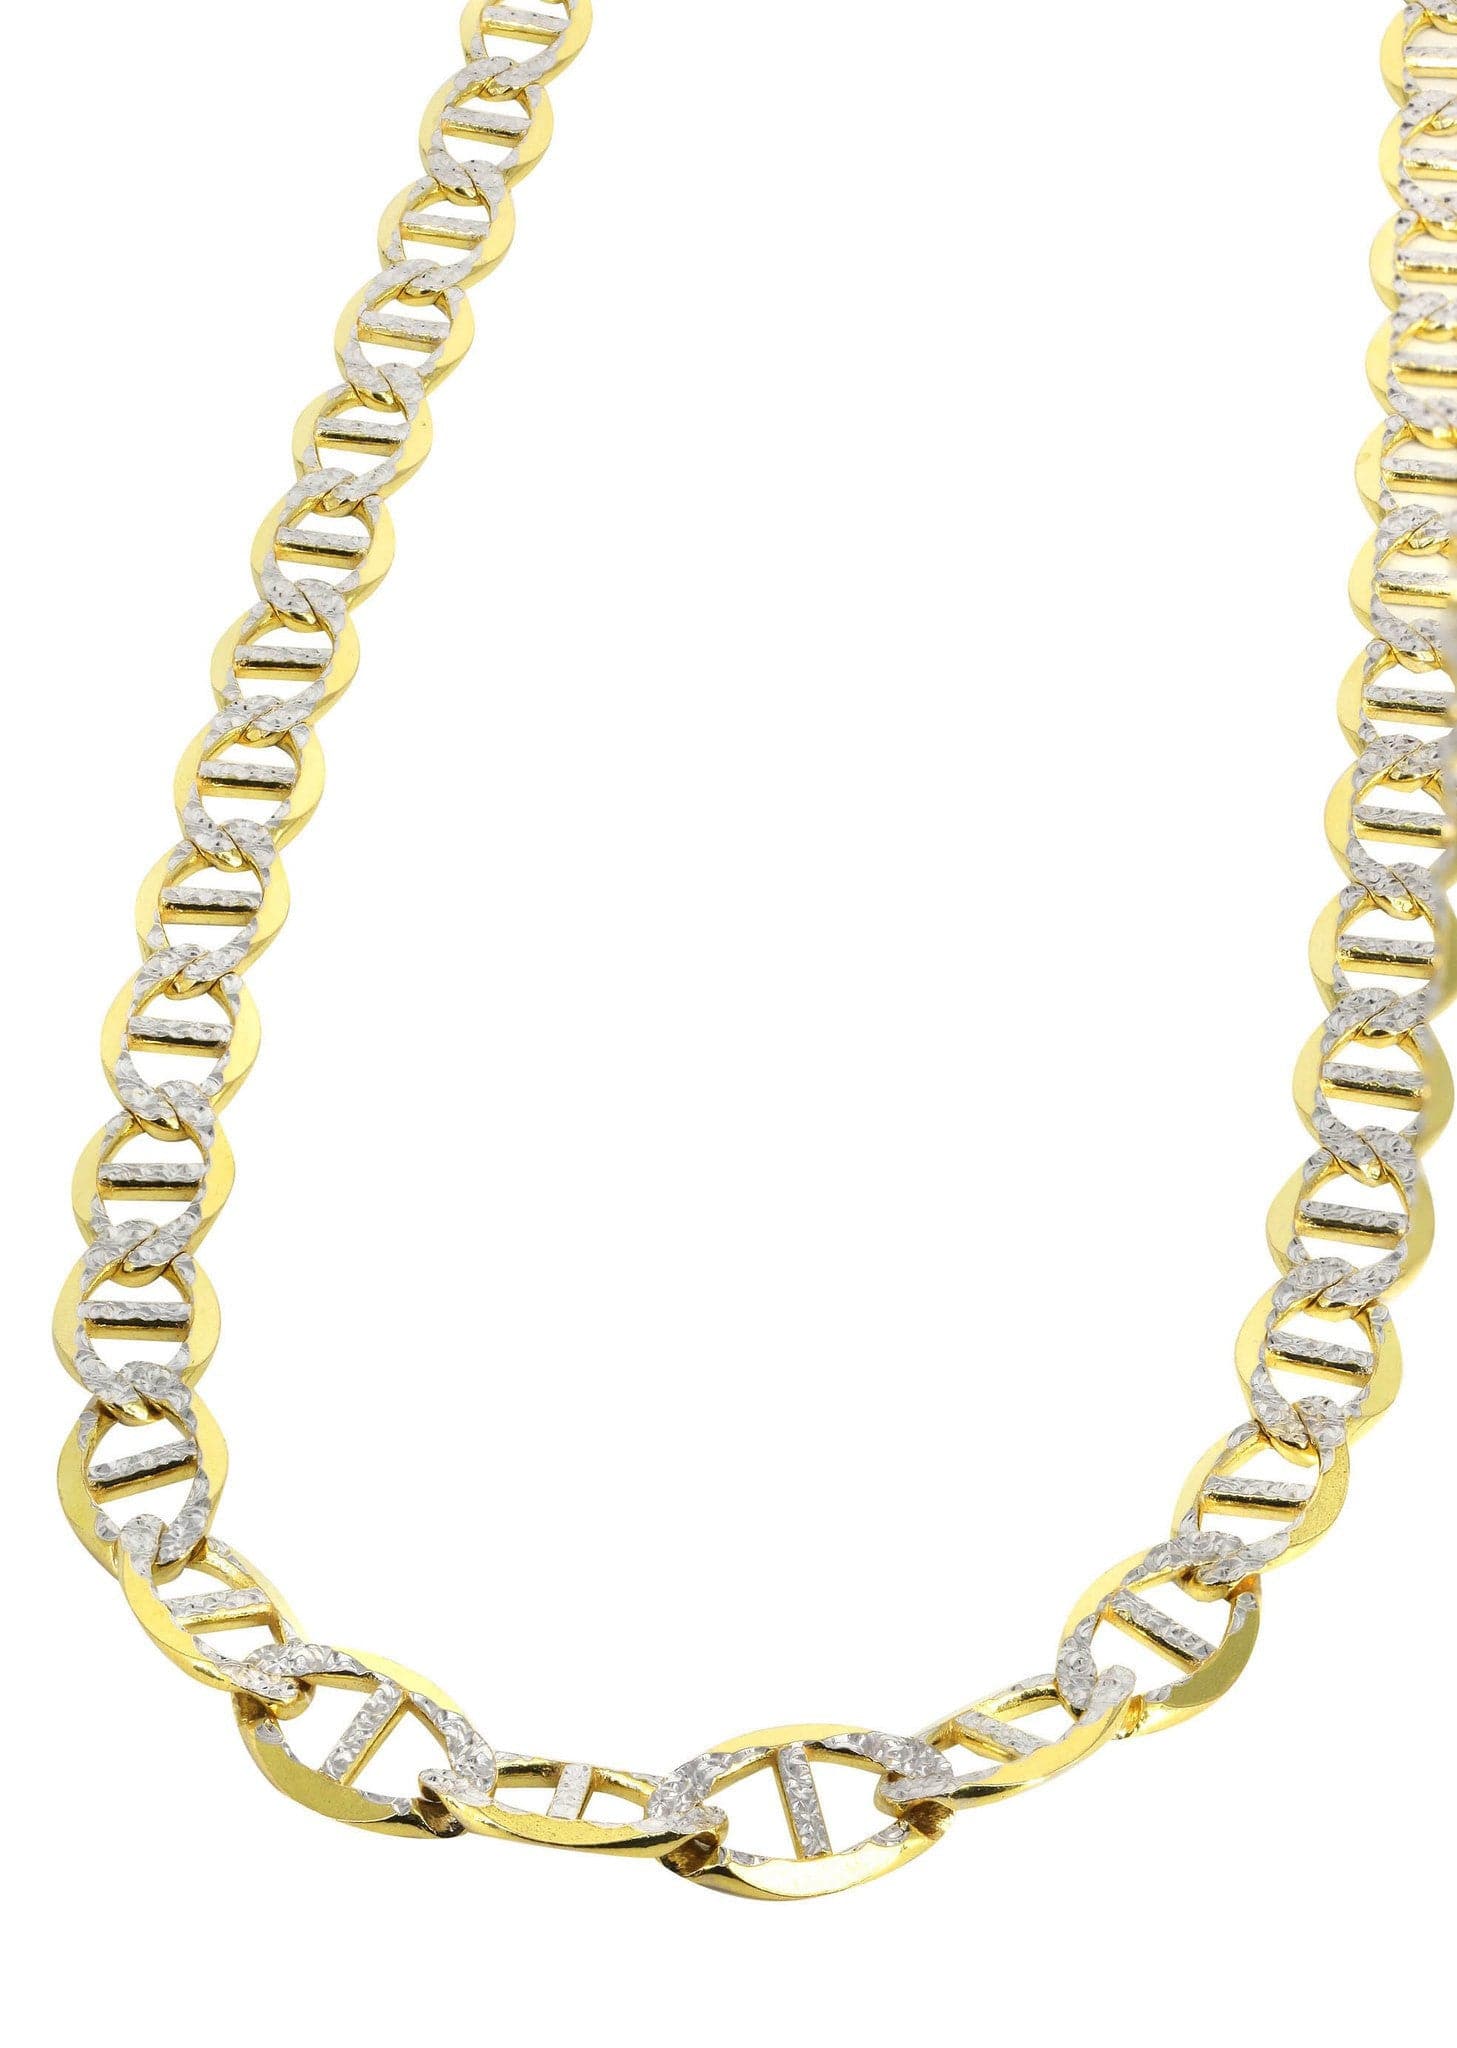 14K Gold 20 Inch Solid Mariner Chain Necklace - JCPenney